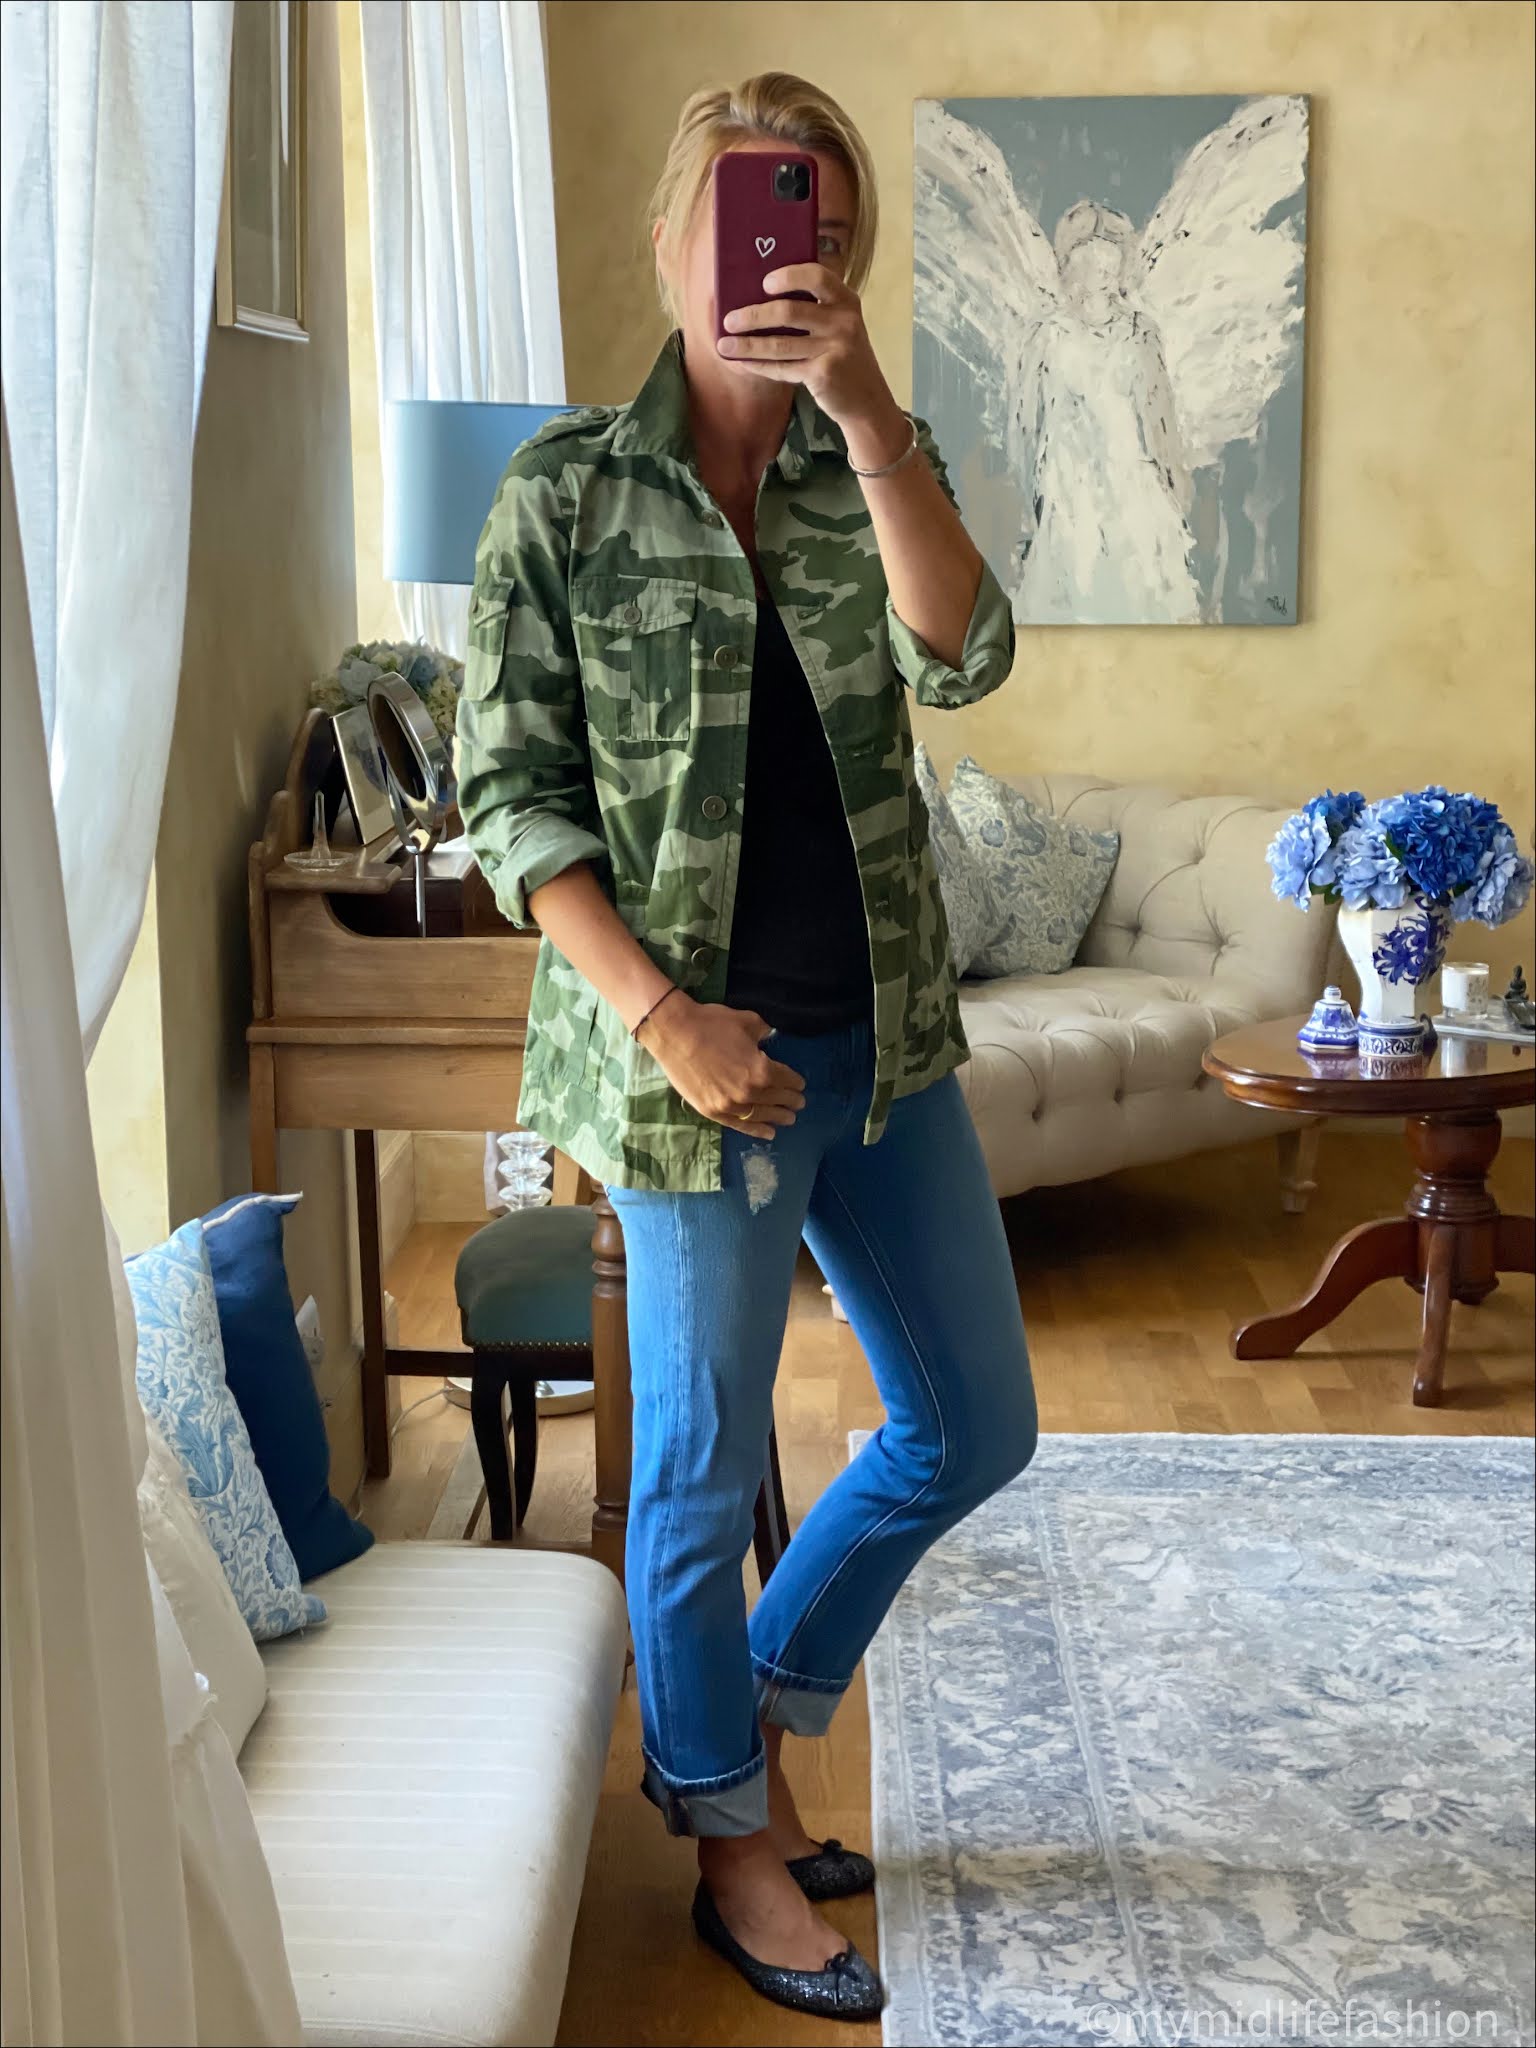 my midlife fashion, j crew camouflage jacket, and other stories ribbed tank, number 44 boyfriend jean, French sole India glitter ballet pumps